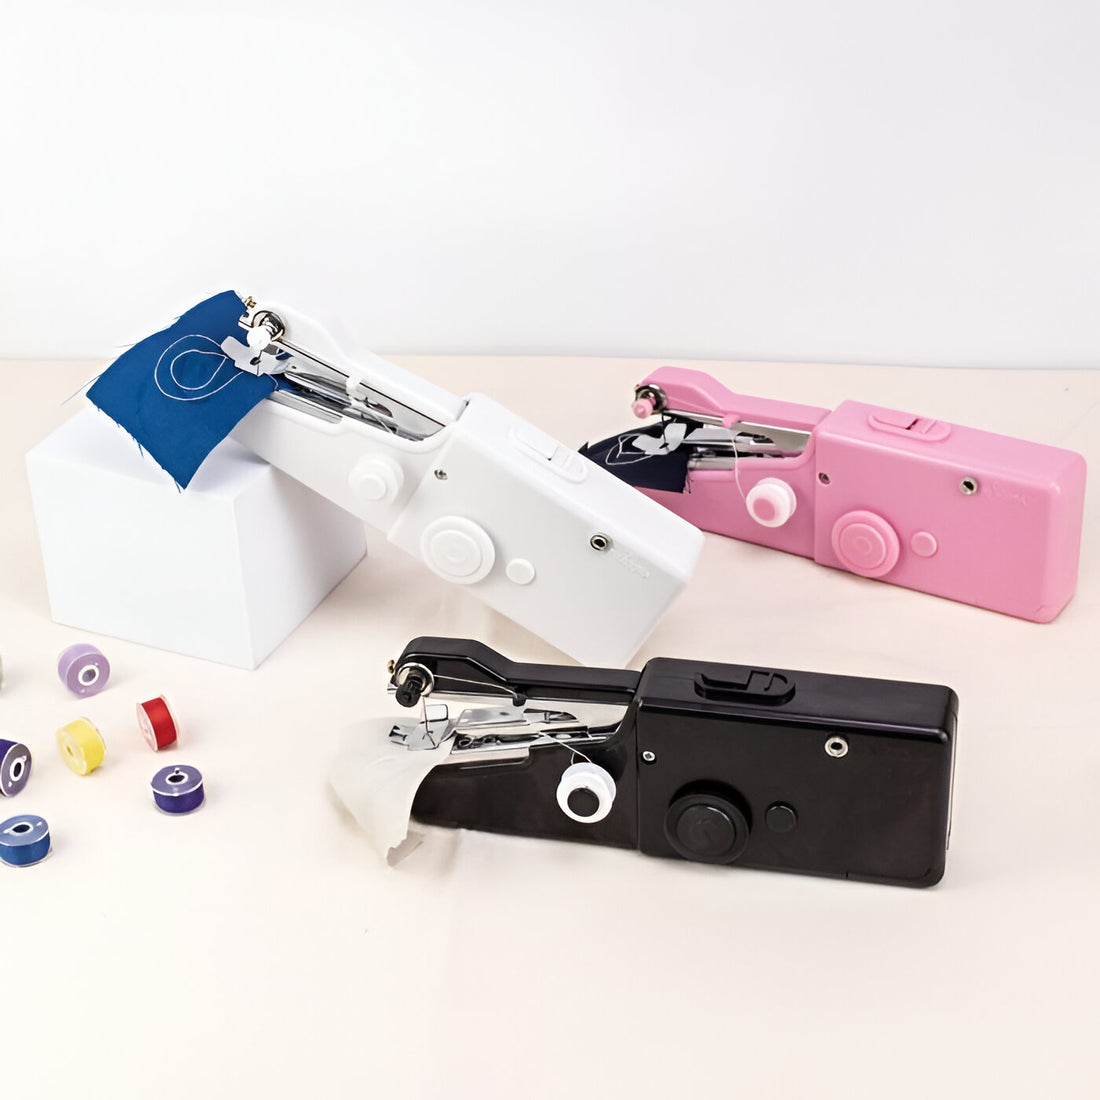 Mini Handheld Cordless Electric Sewing Machine - Portable Stitcher for Clothes, Fabrics, and Needlework